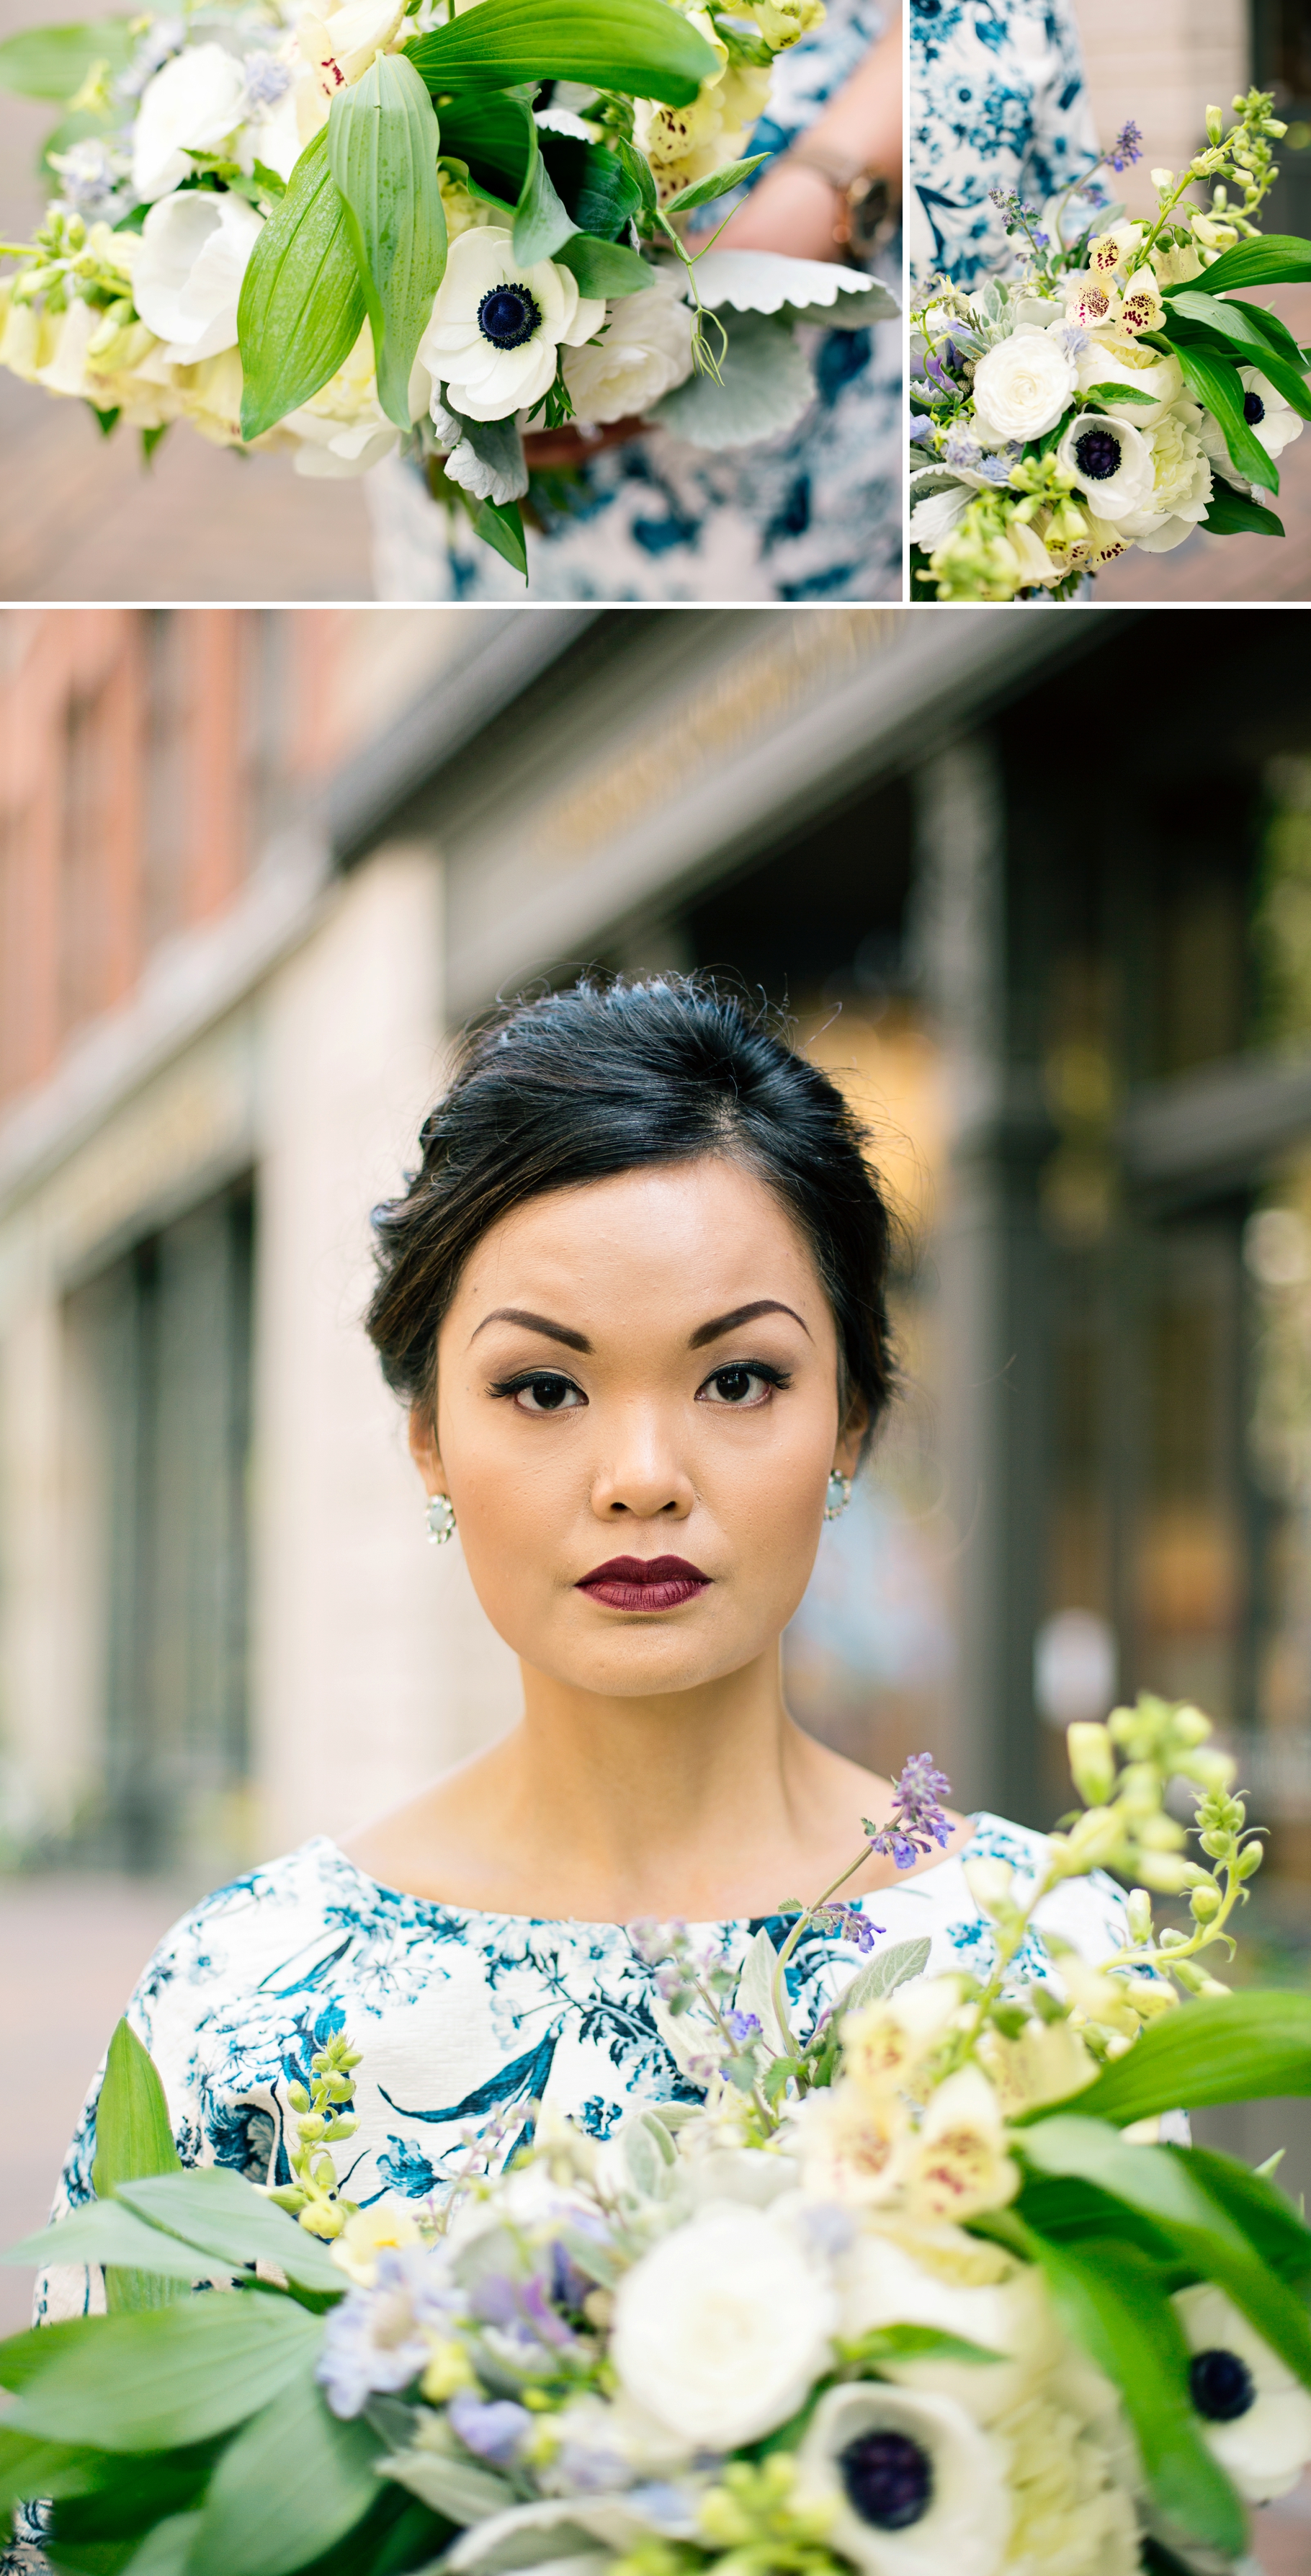 6-Bride-Bridal-Portraits-Wedding-Bouquet-White-Blue-Florals-Occidental-Park-Pioneer-Square-Seattle-Wedding-Day-Photographer-Photography-by-Betty-Elaine